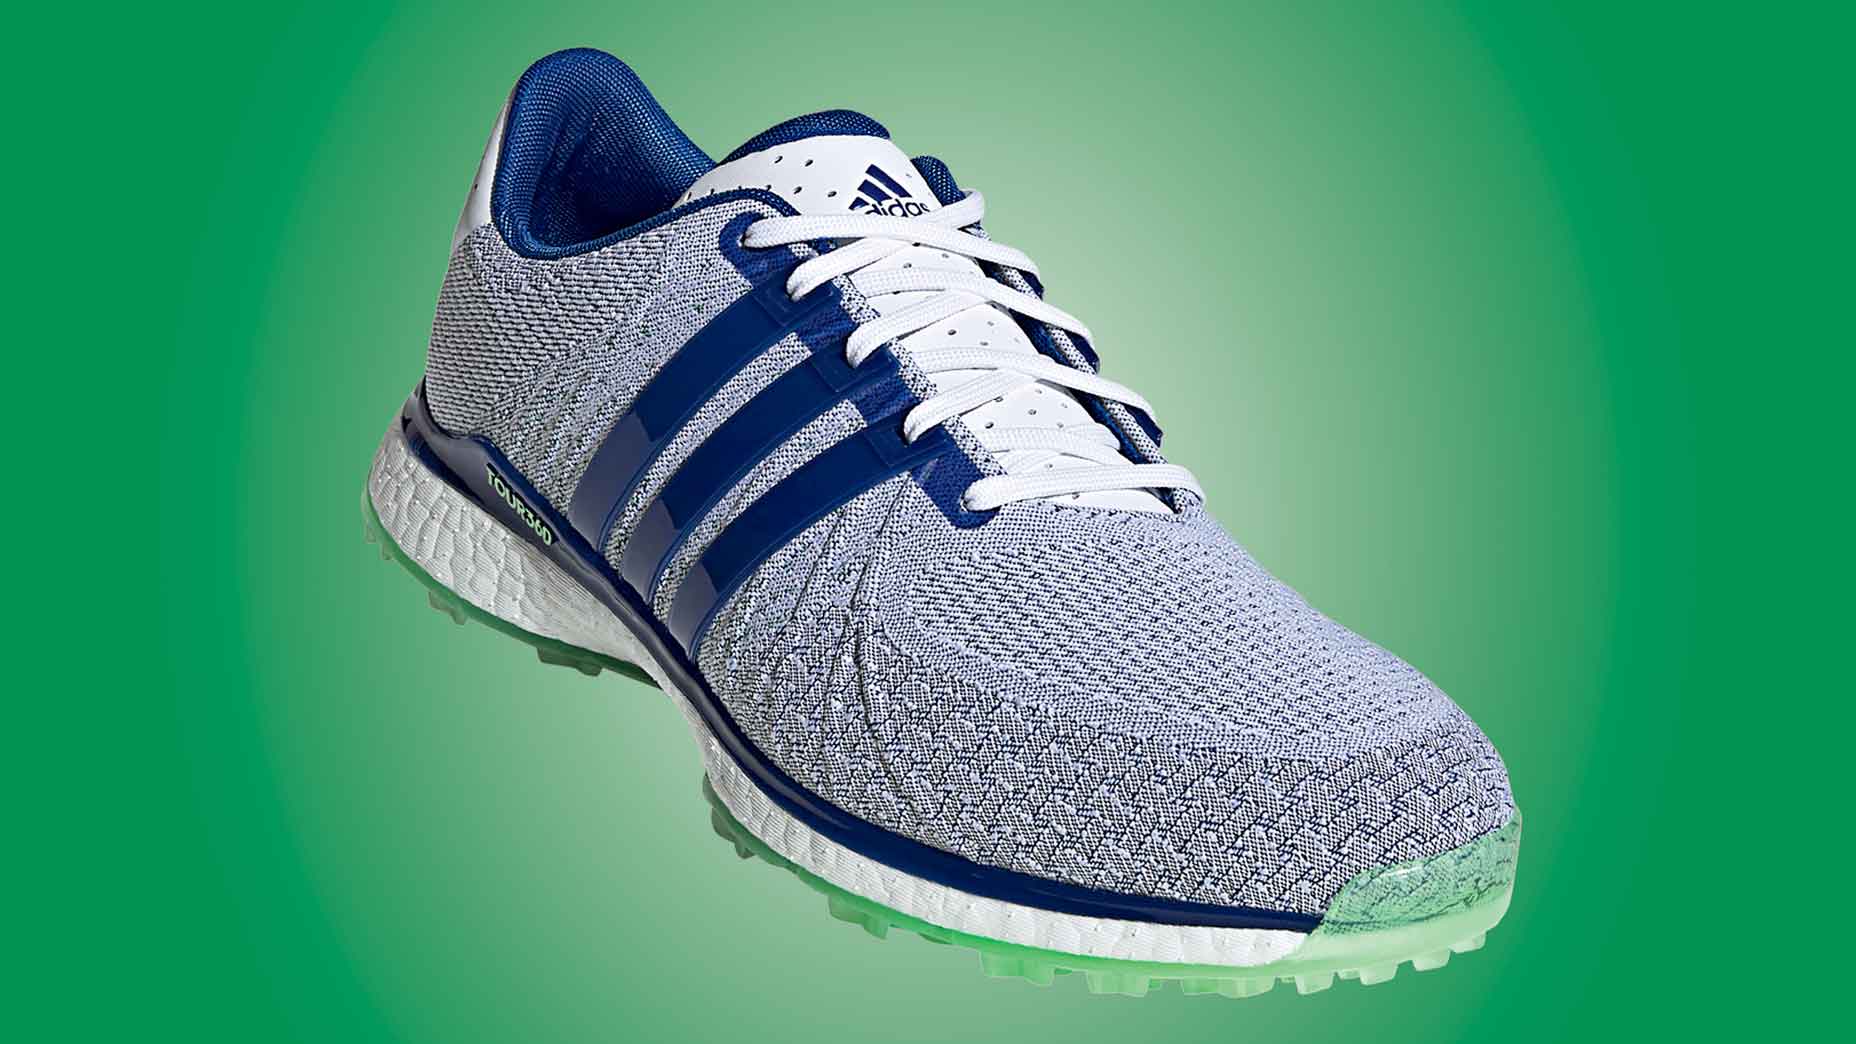 To meditation Absolute napkin These Adidas golf shoes can conquer the worst weather on the course